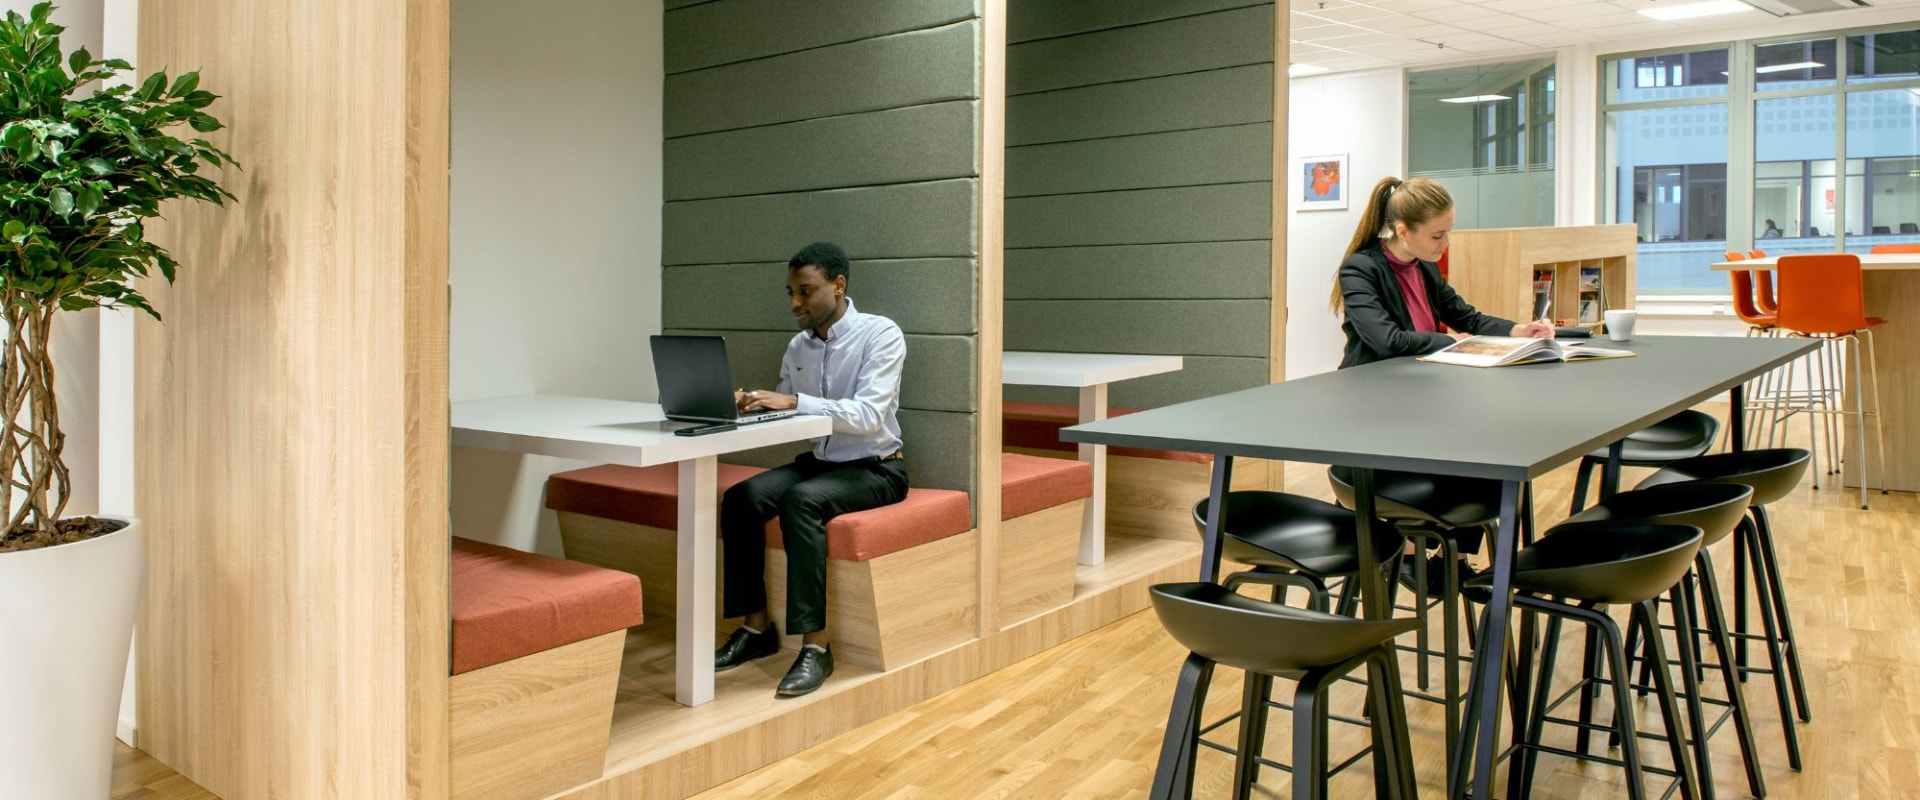 What is the difference between coworking and traditional office?